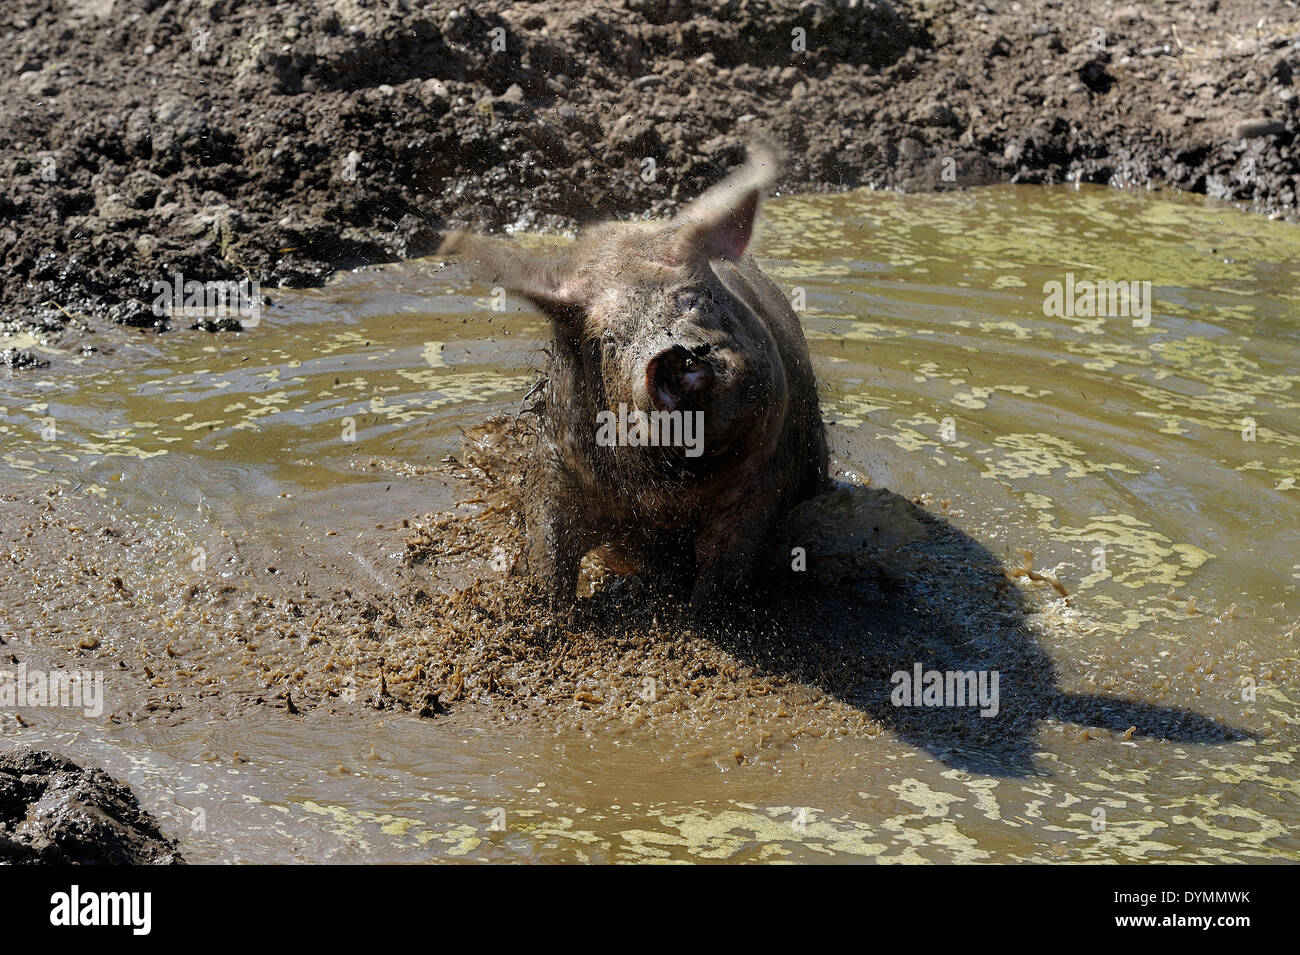 A Pig in a mud bath shaking off the water Stock Photo